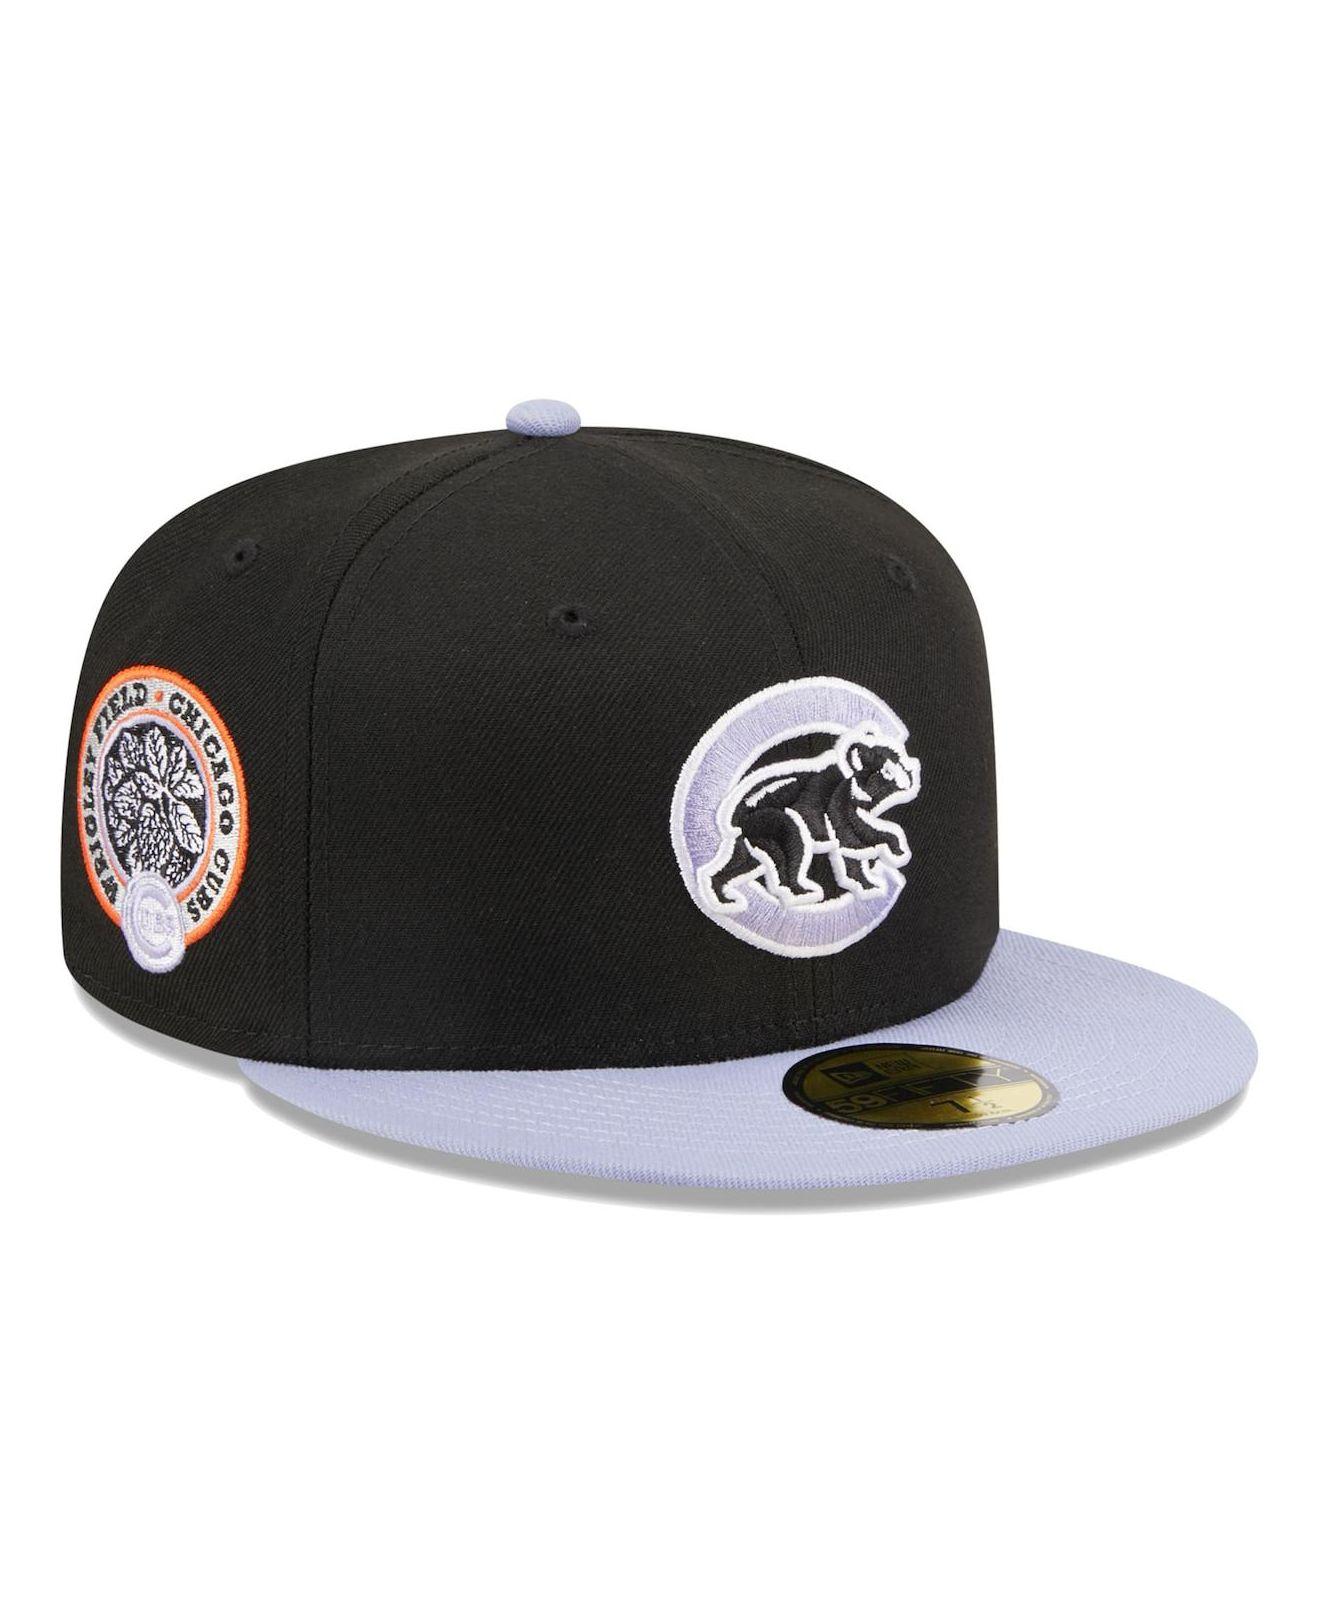 Men's New Era Black San Francisco Giants 9/11 Memorial Side Patch 59FIFTY Fitted Hat